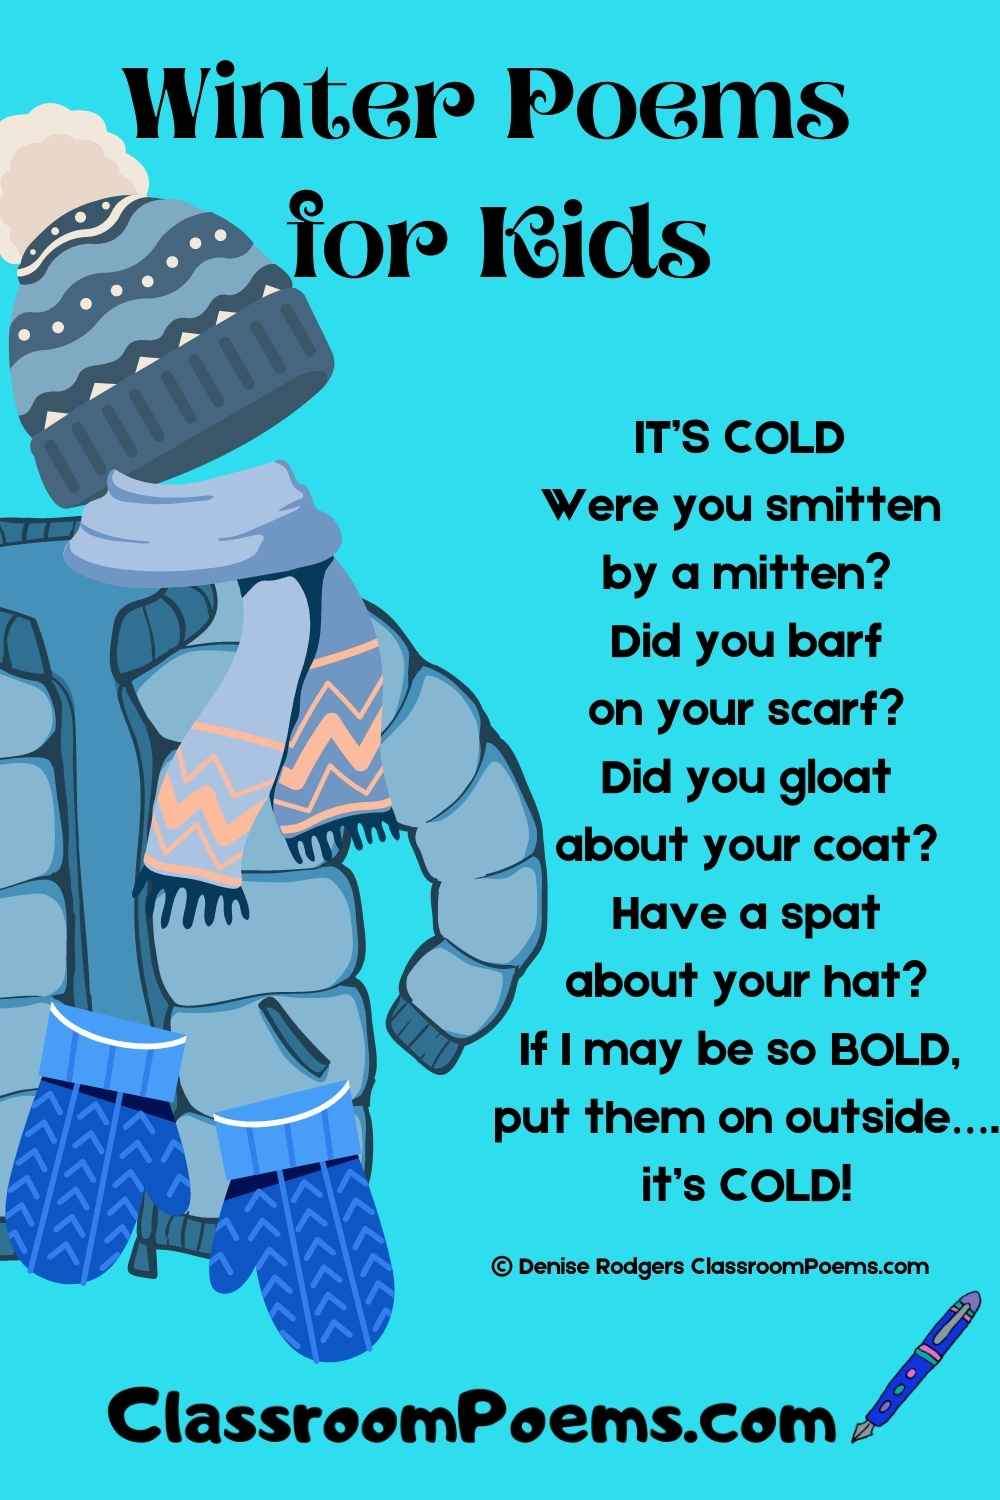 Winter Poems for Kids by Denise Rodgers on ClassroomPoems.com.